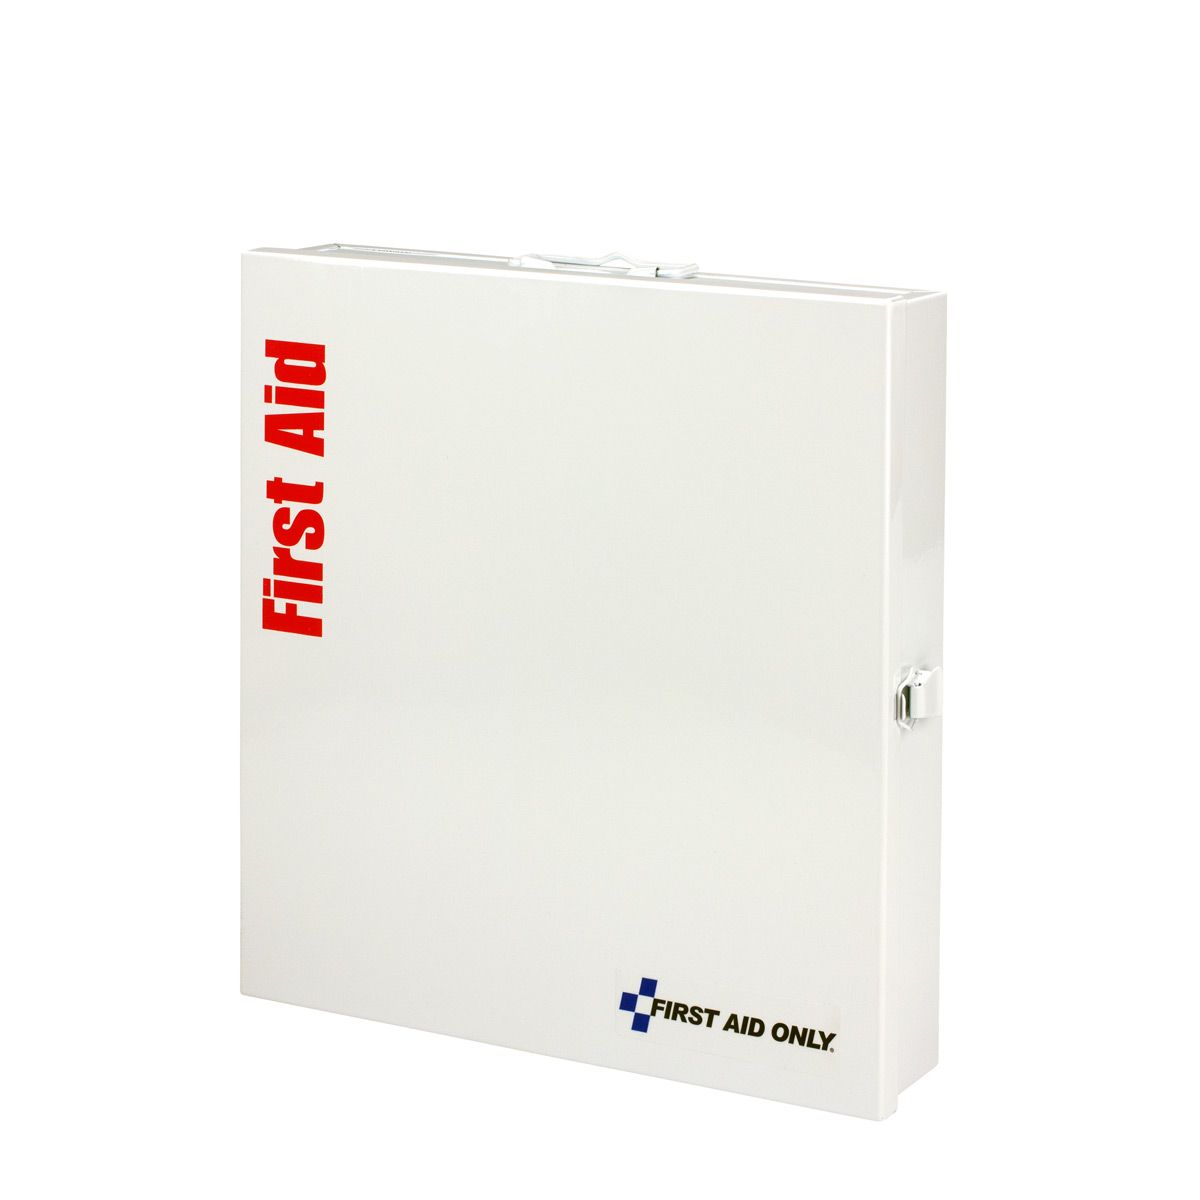 First Aid Only 50-Person Large Metal SmartCompliance First Aid Cabinet with Medication from Columbia Safety